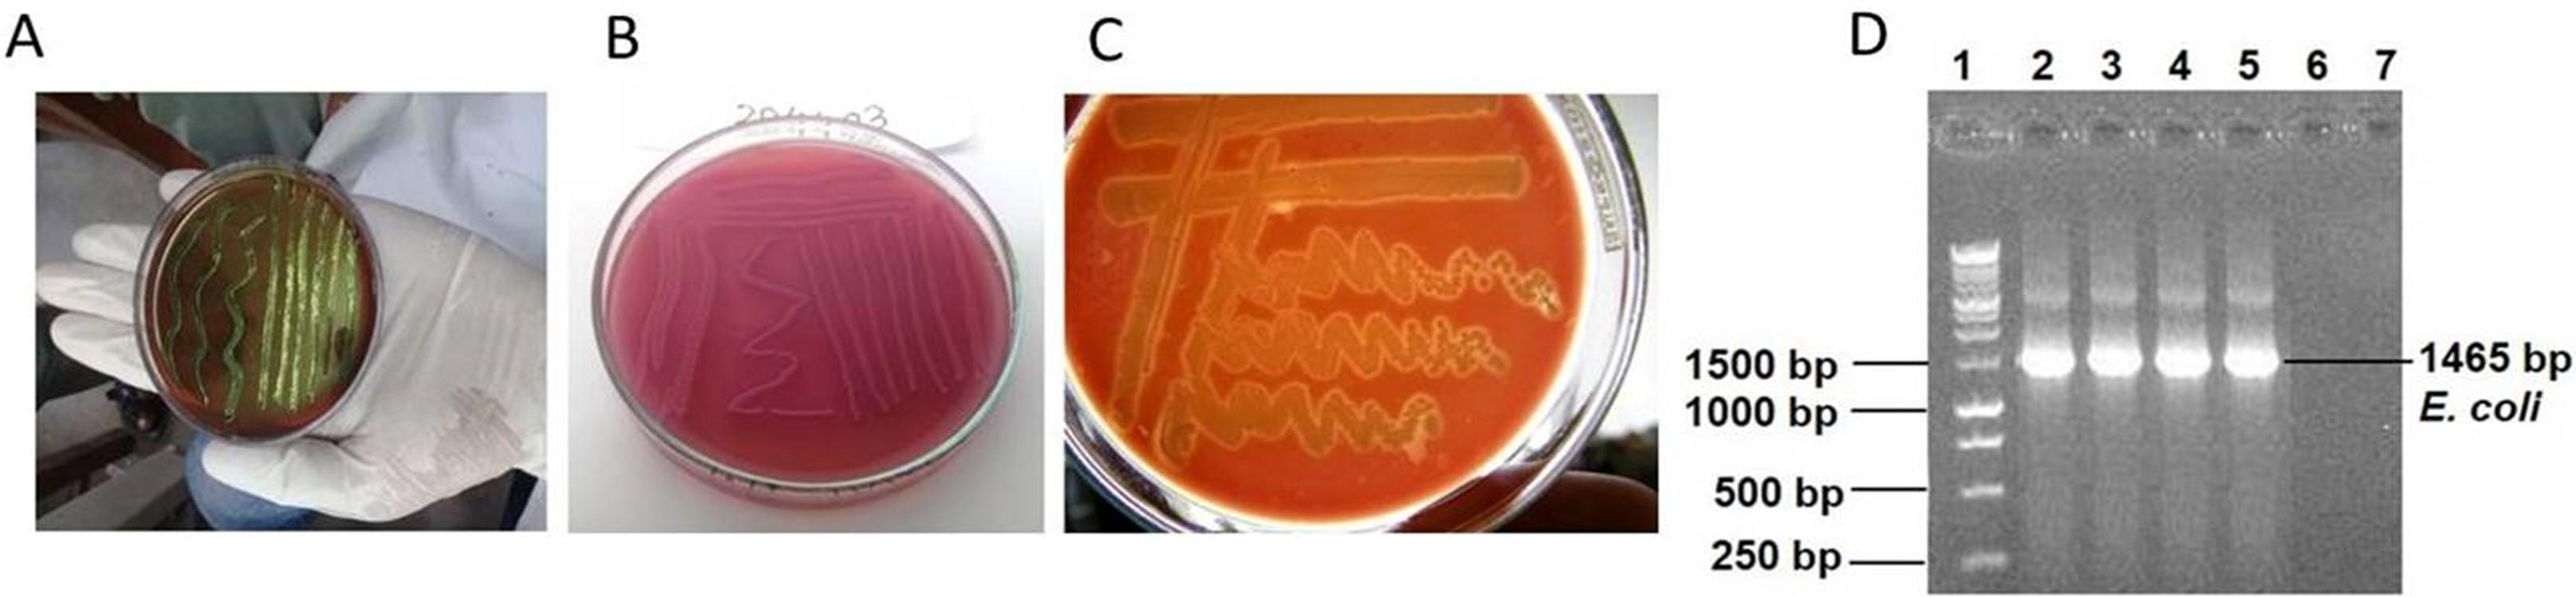 Molecular characterization of multidrug-resistant Escherichia coli isolated from human urine infections with their antibiogram profile